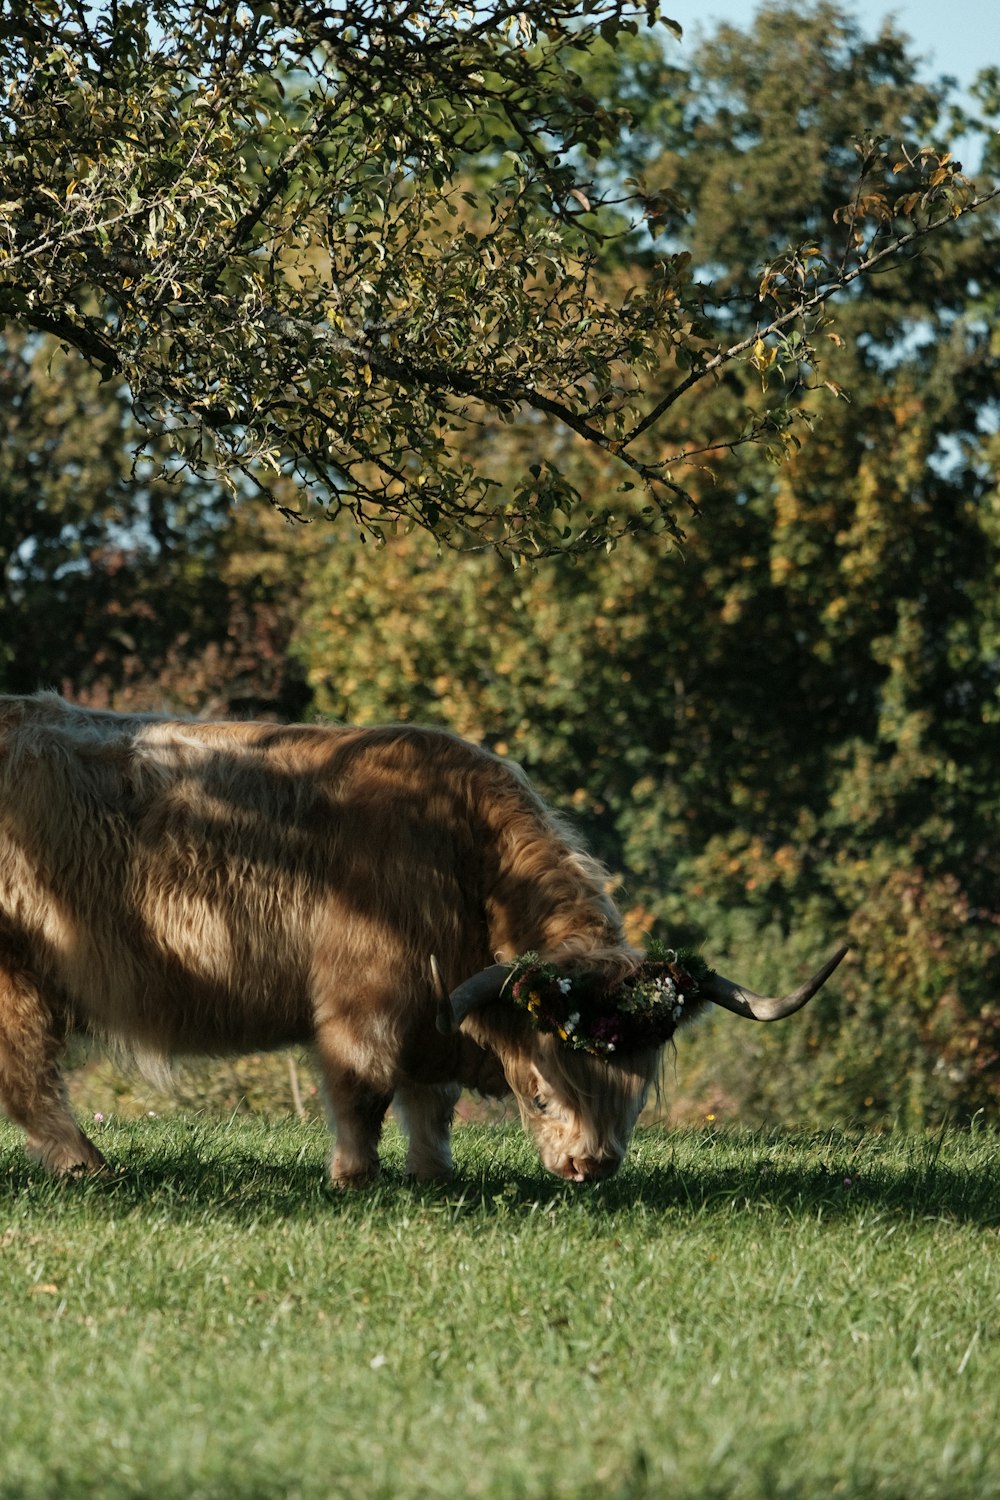 a yak grazing in a field with trees in the background